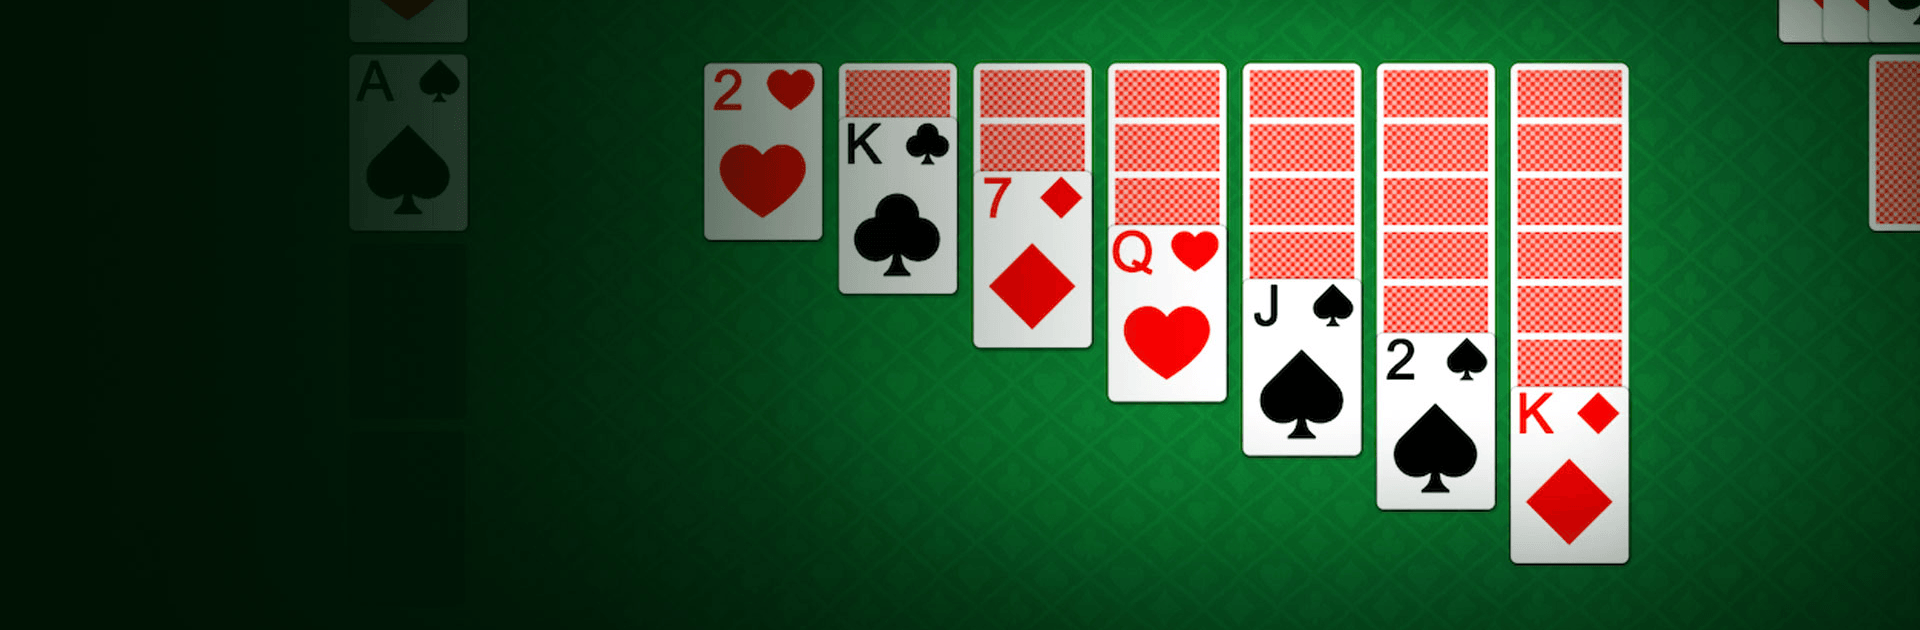 Download & Play Solitaire - Classic Card Games on PC & Mac (Emulator).